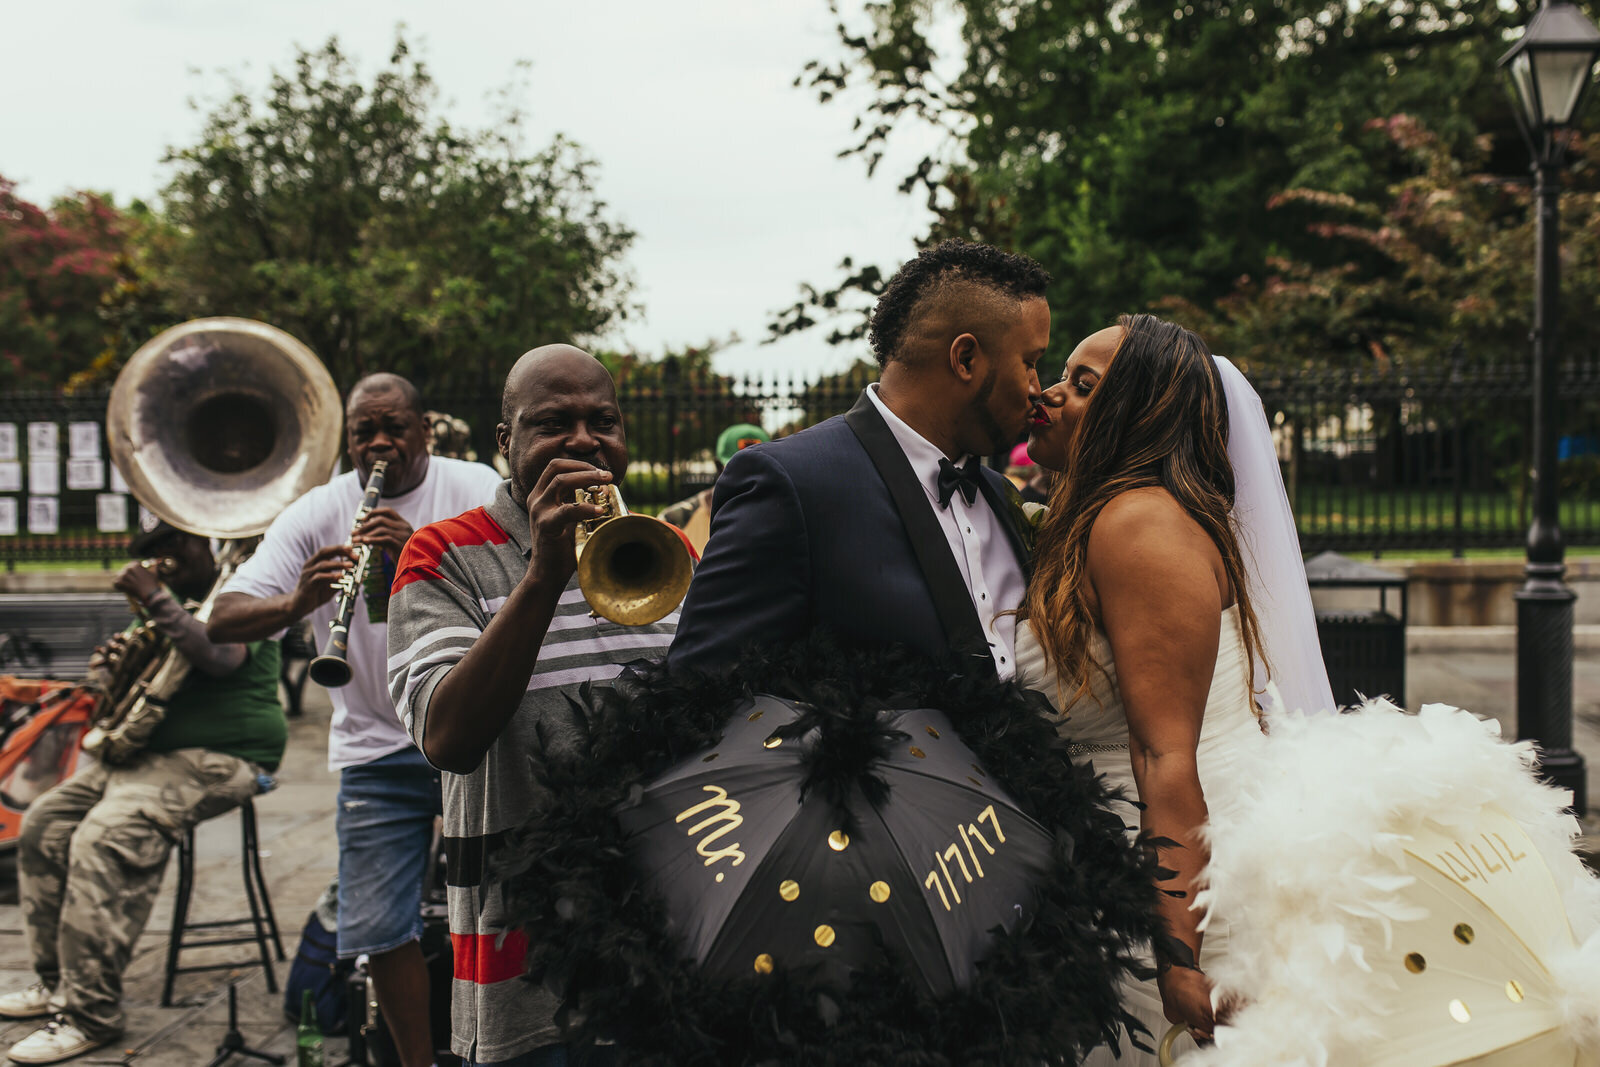 Elopement Photography in New Orleans - The Swansons